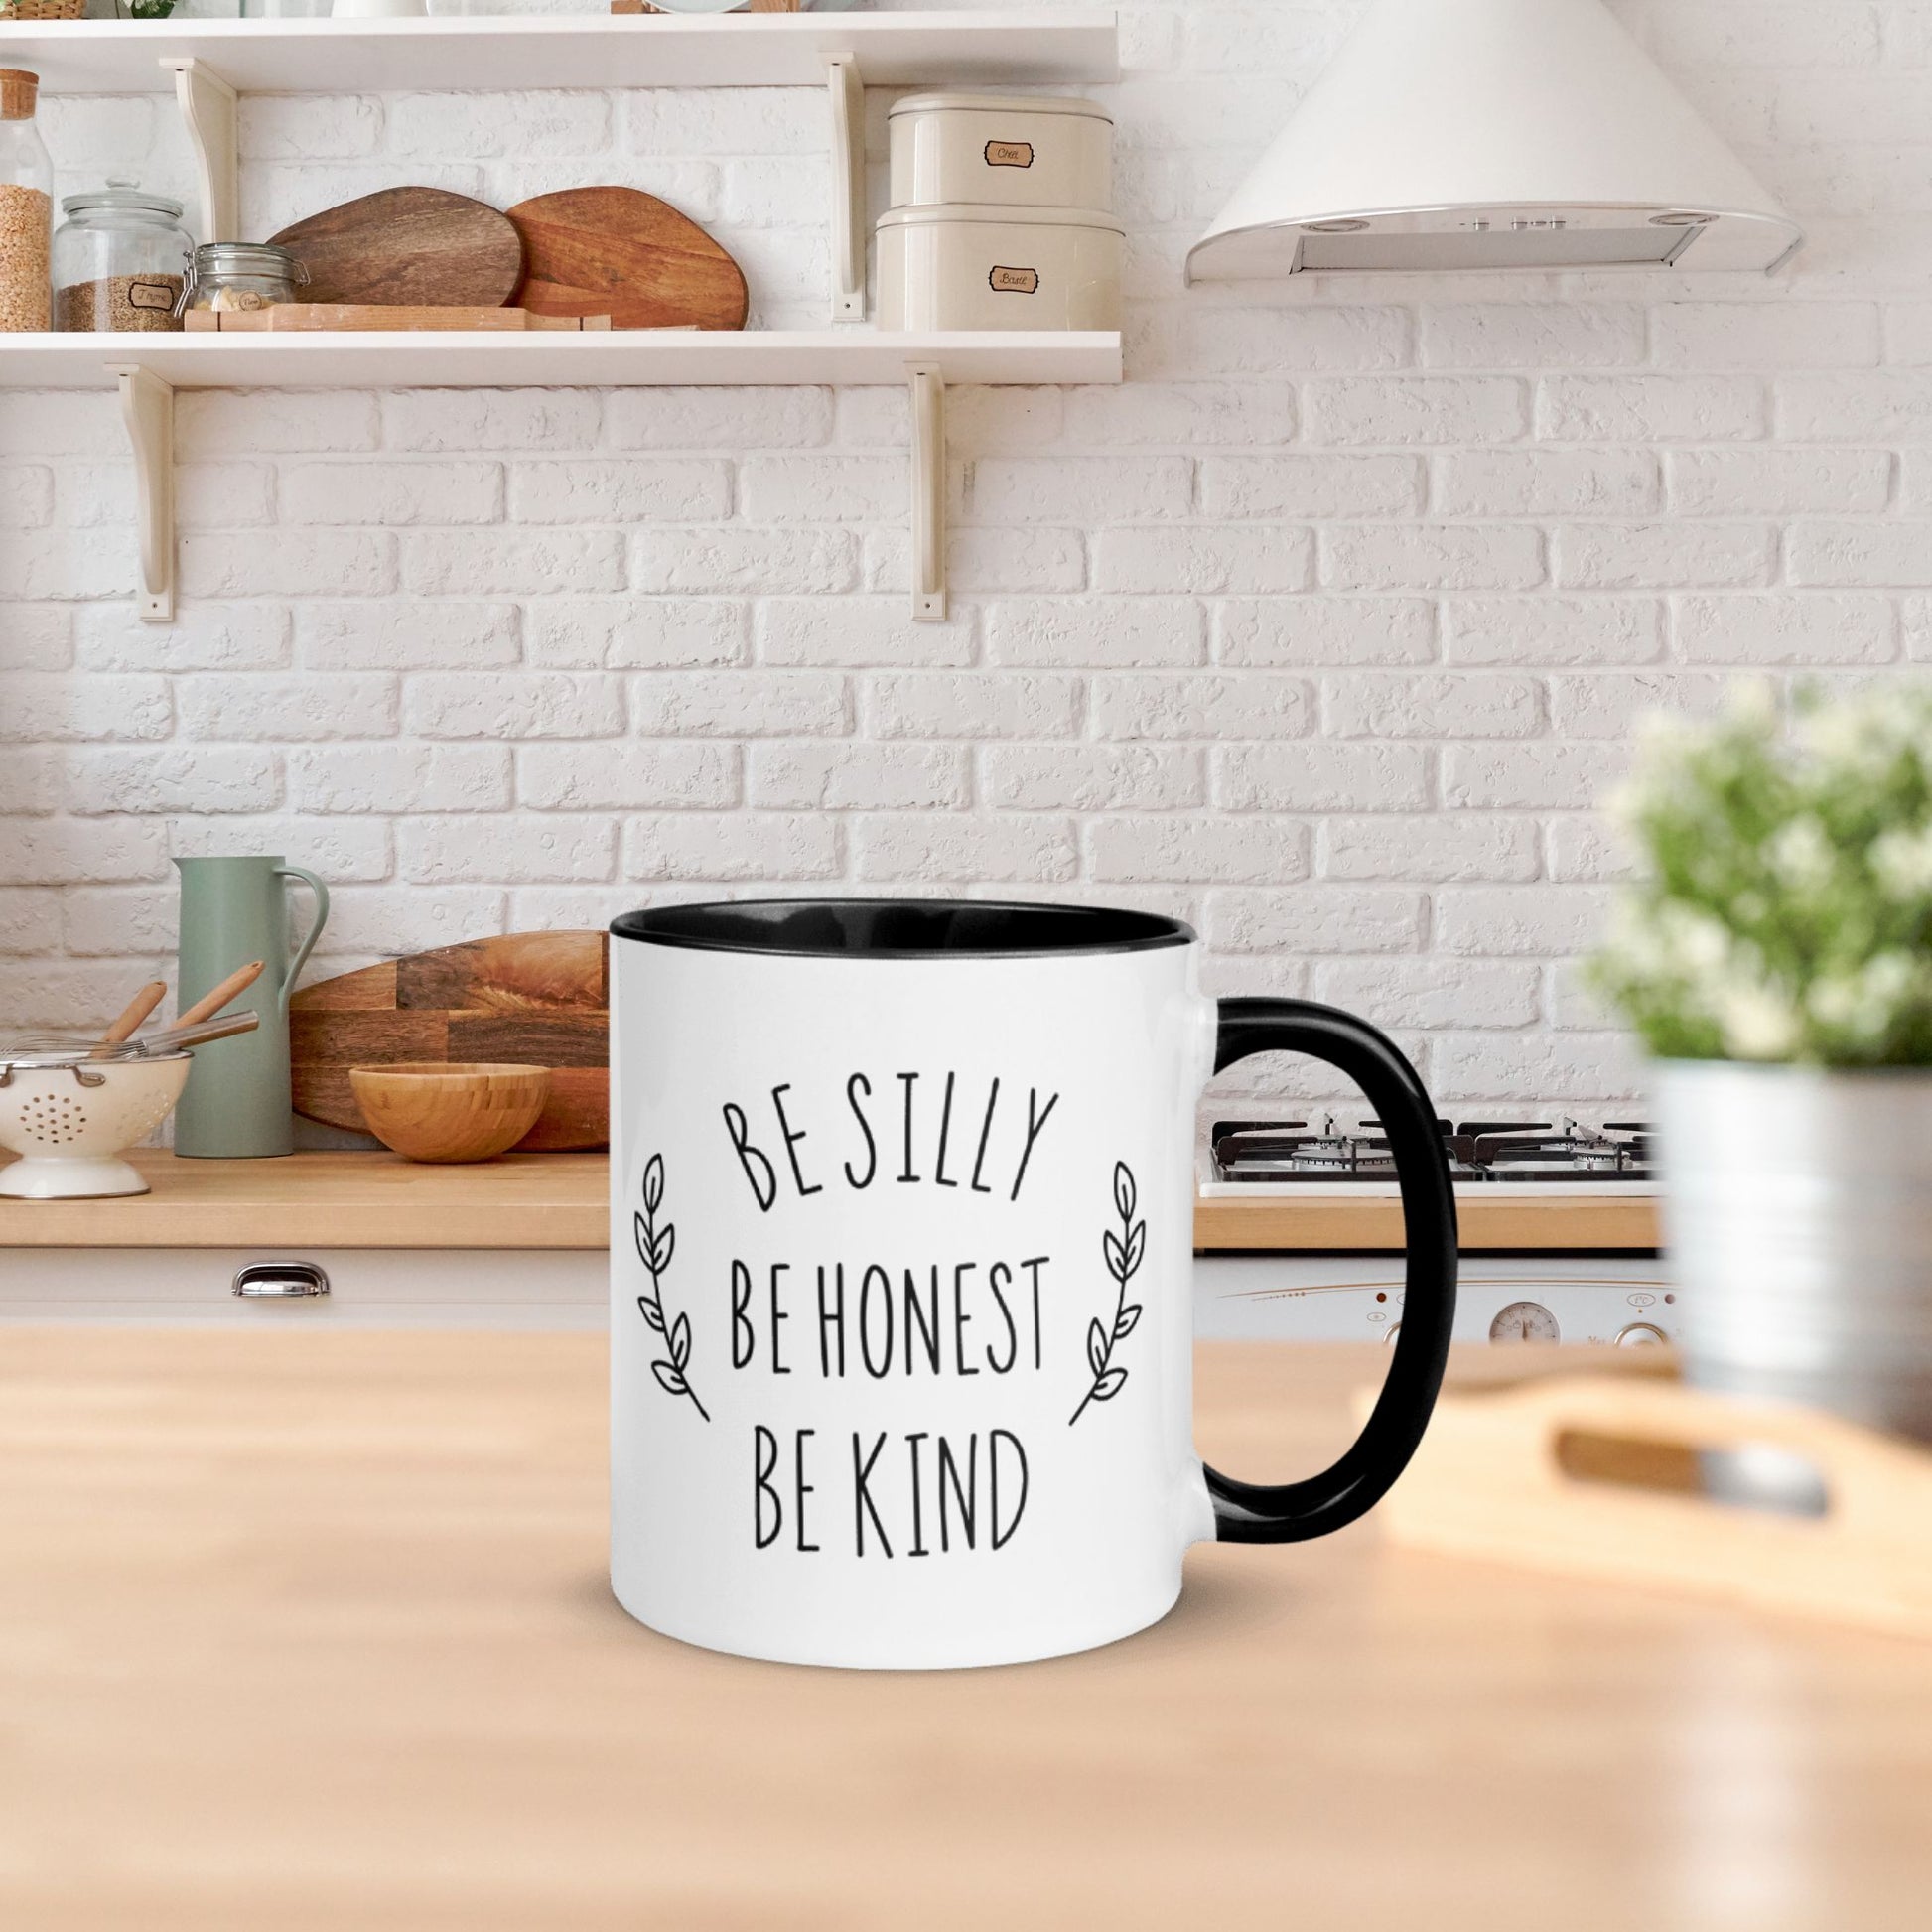 Be Silly Be Honest Be Kind Inspirational Quote Coffee Mug